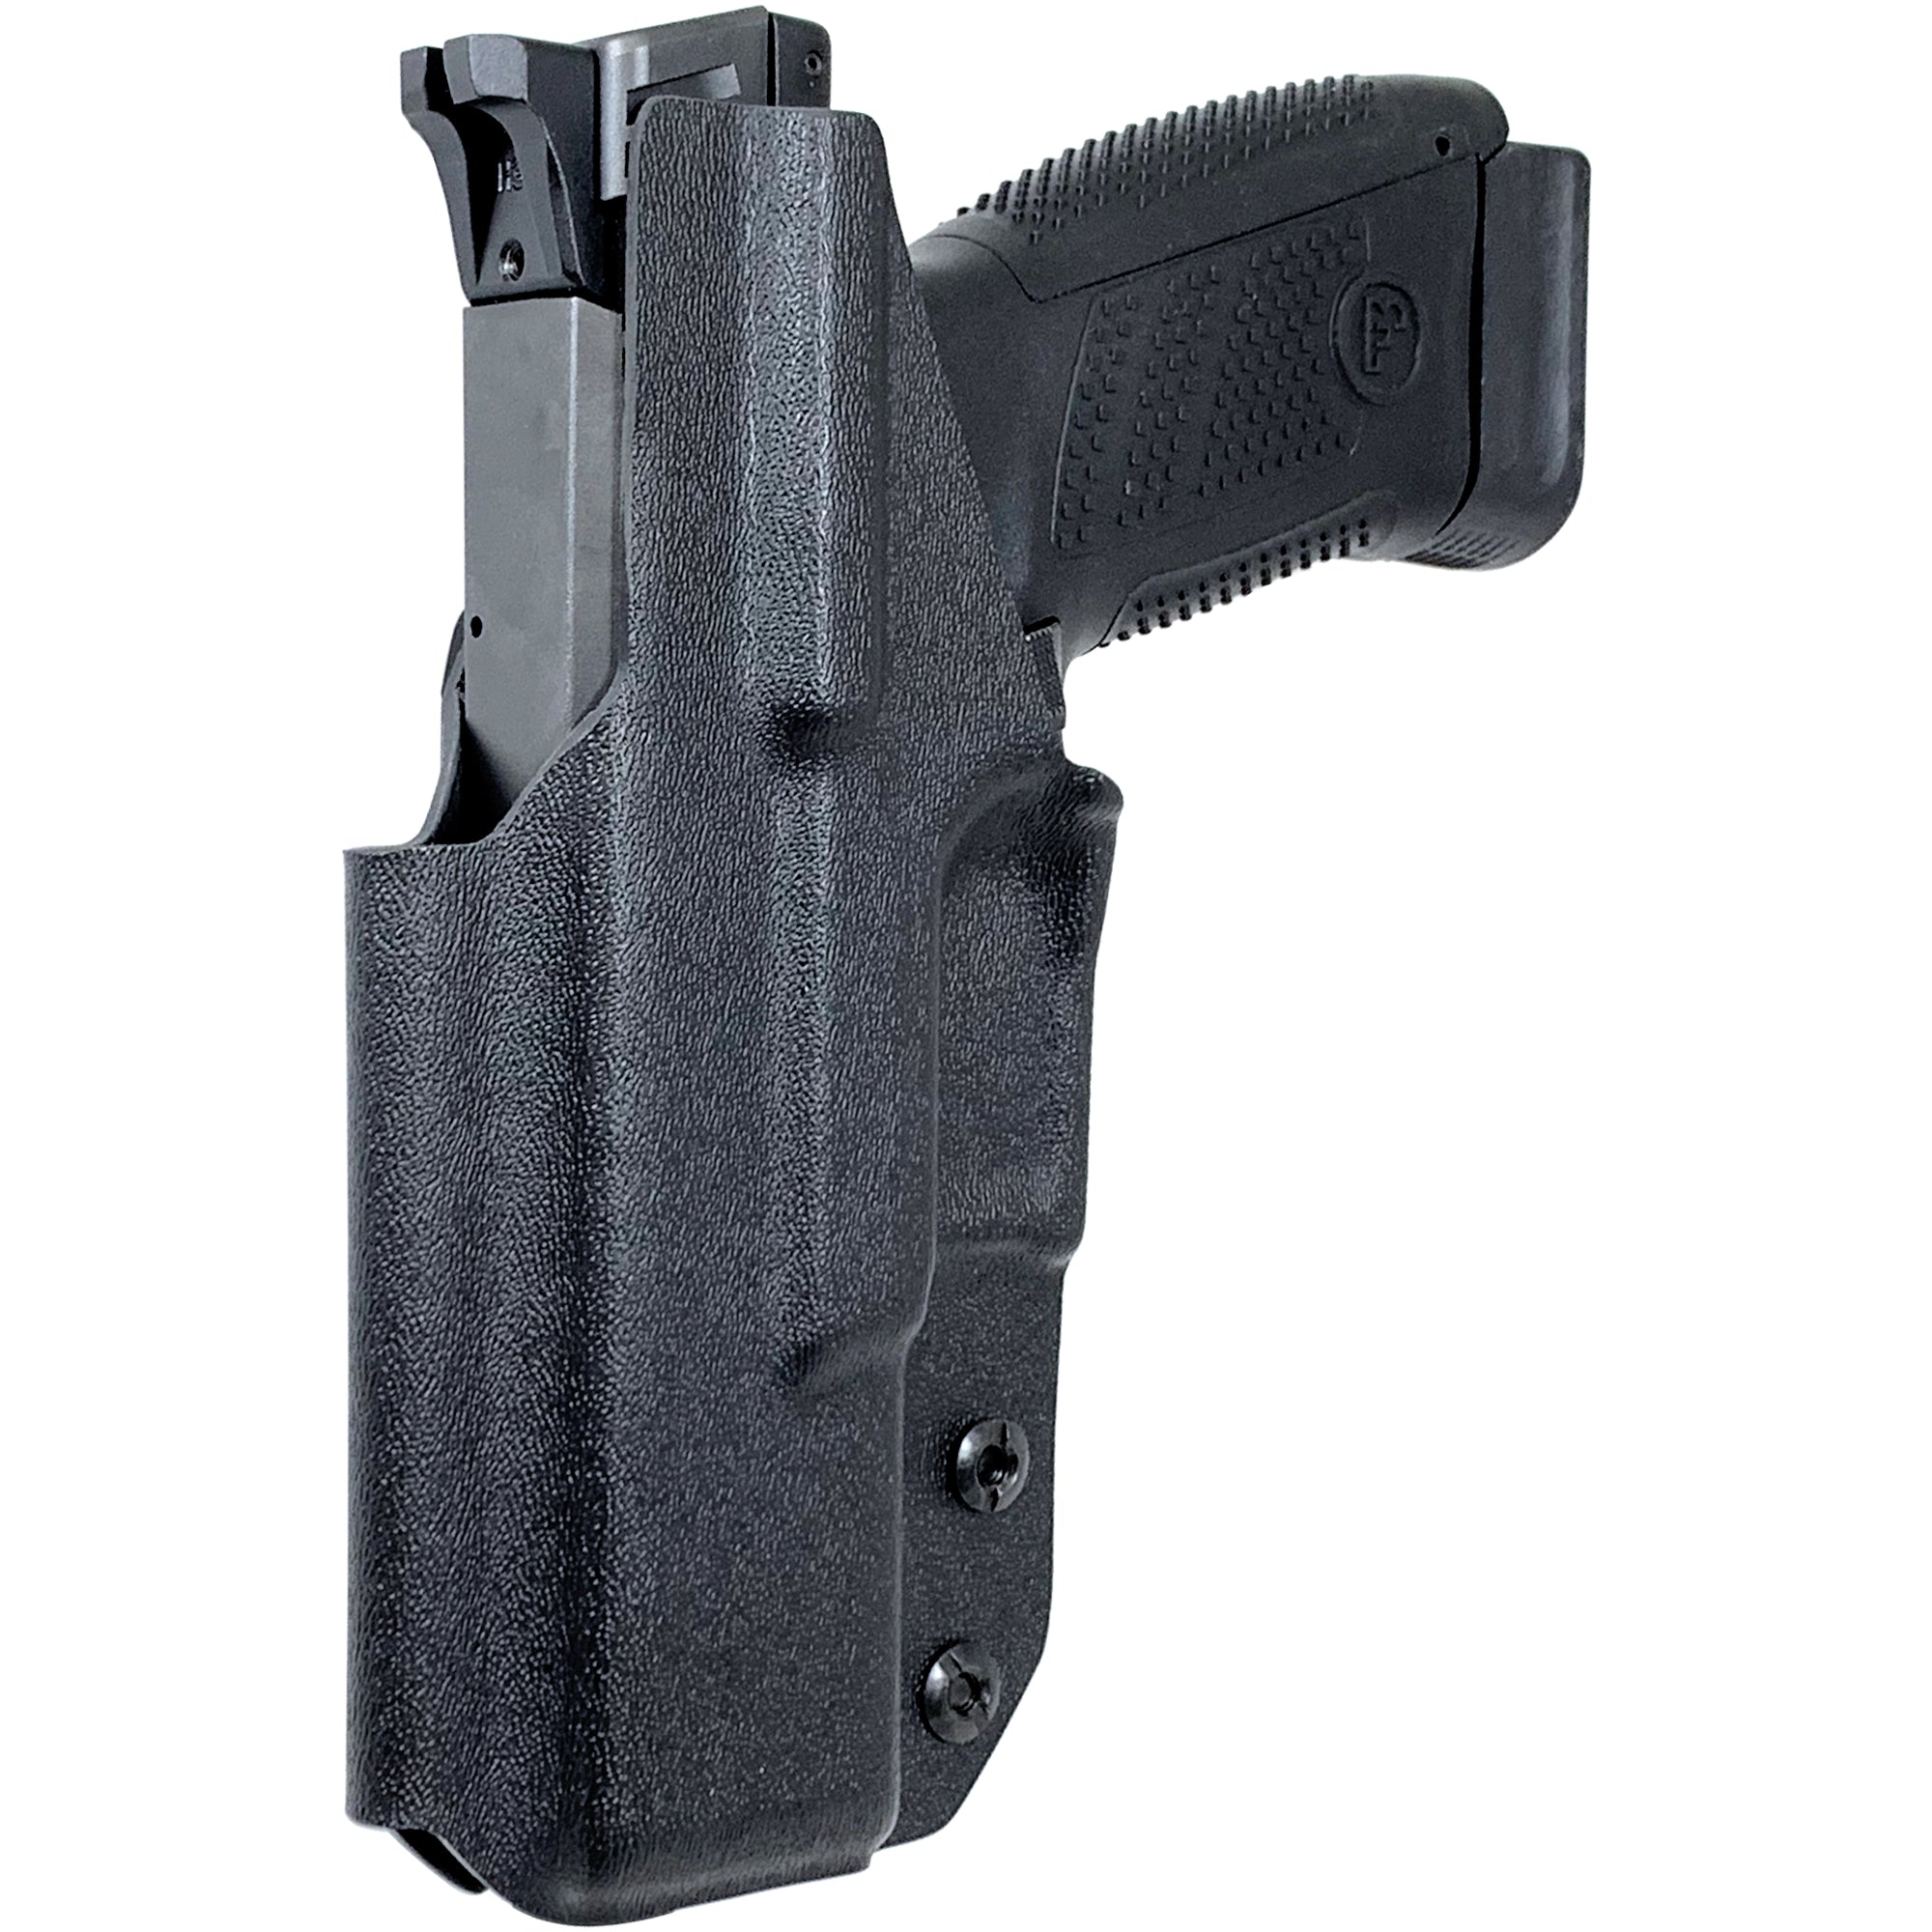 CZ P-10C IWB Sweat Guard Holster & Mag Pouch Combo